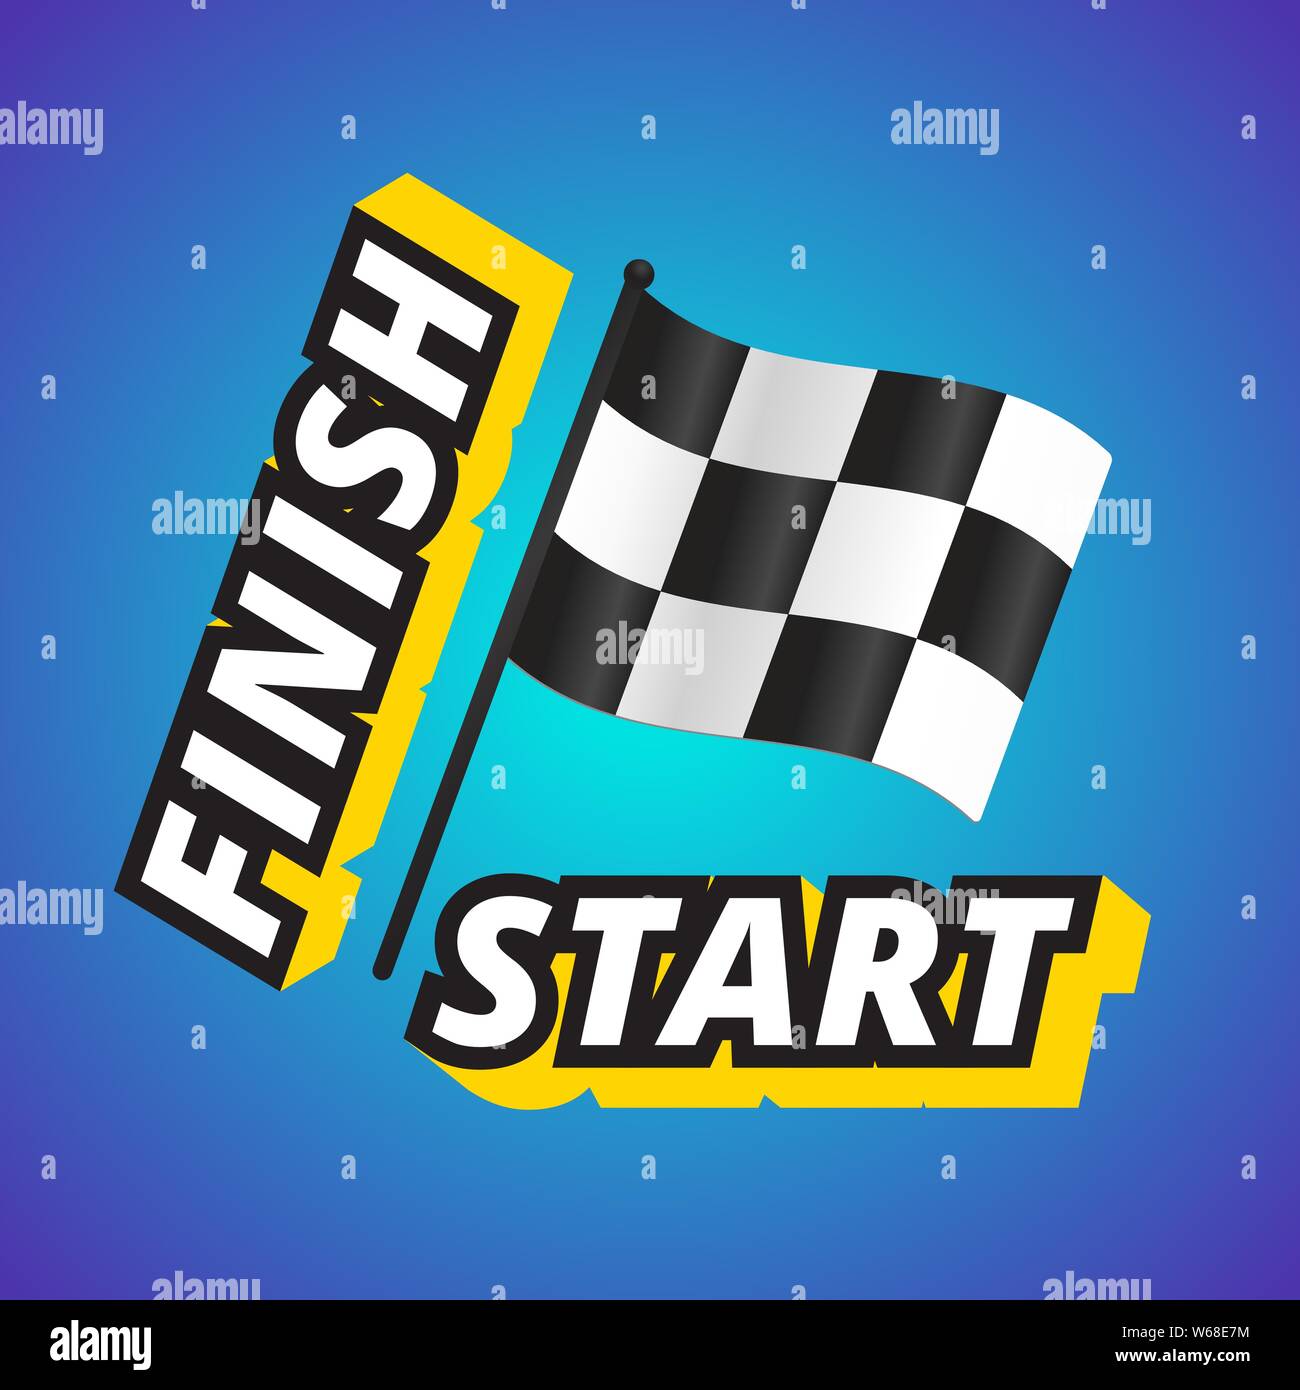 Start and finish text with checkered flag Stock Vector